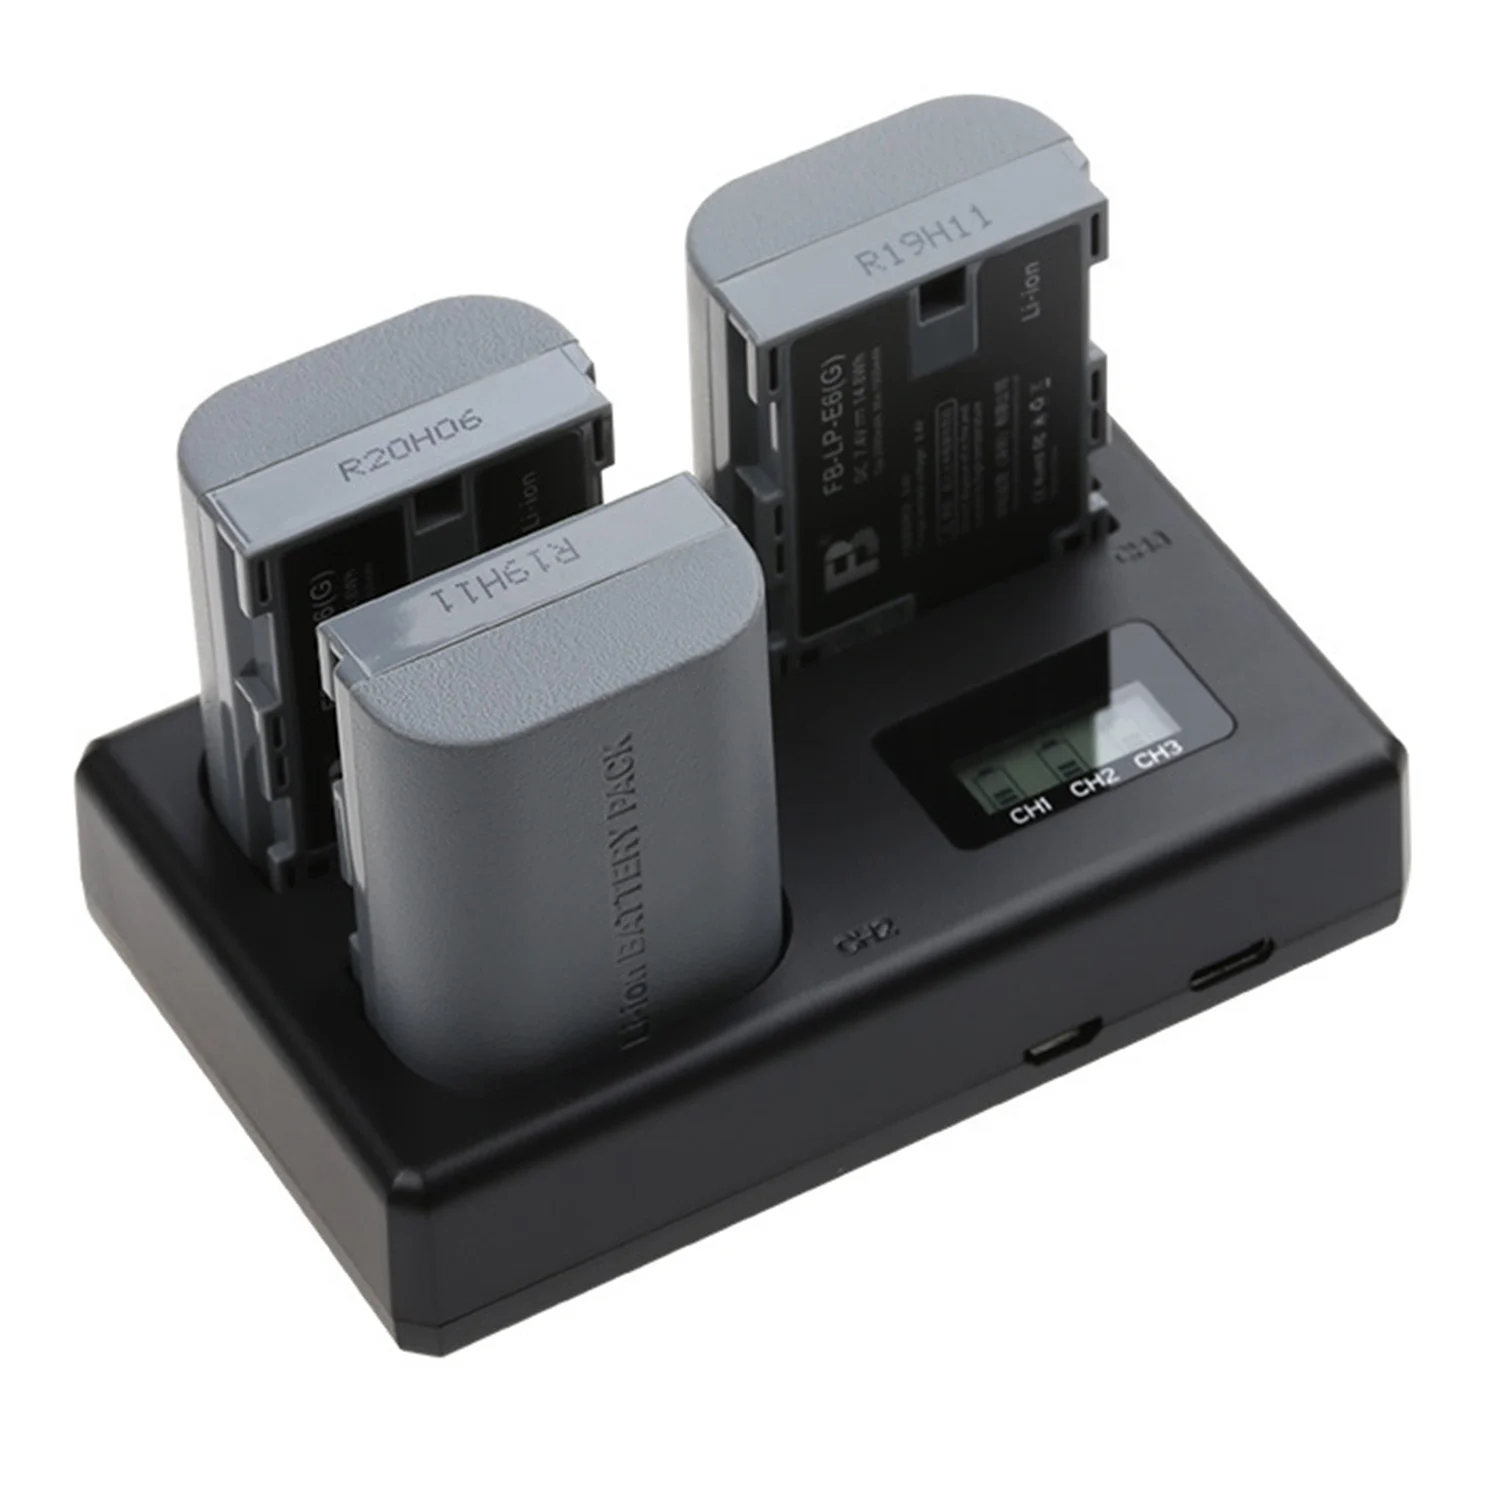 

Three-Slot Battery Charger Batteries Chargers Use for Charge One/ Two/ Three Batteries At The Same Time Support Fast Charge